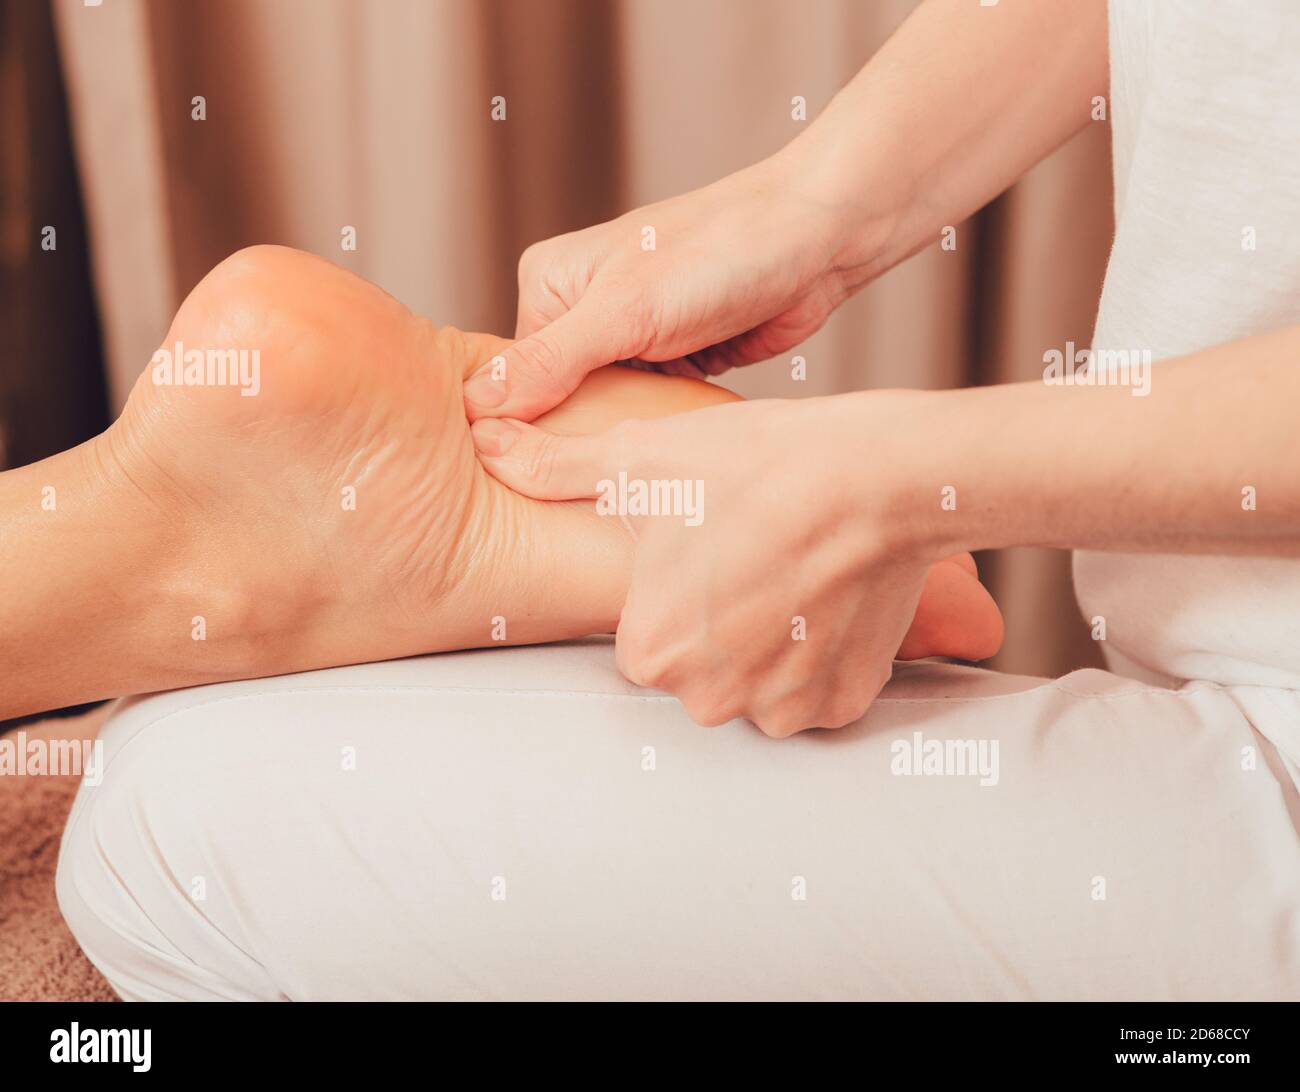 Foot reflexology, foot massage close-up. Masseur pushing on special points on the foot, massage treatment Stock Photo